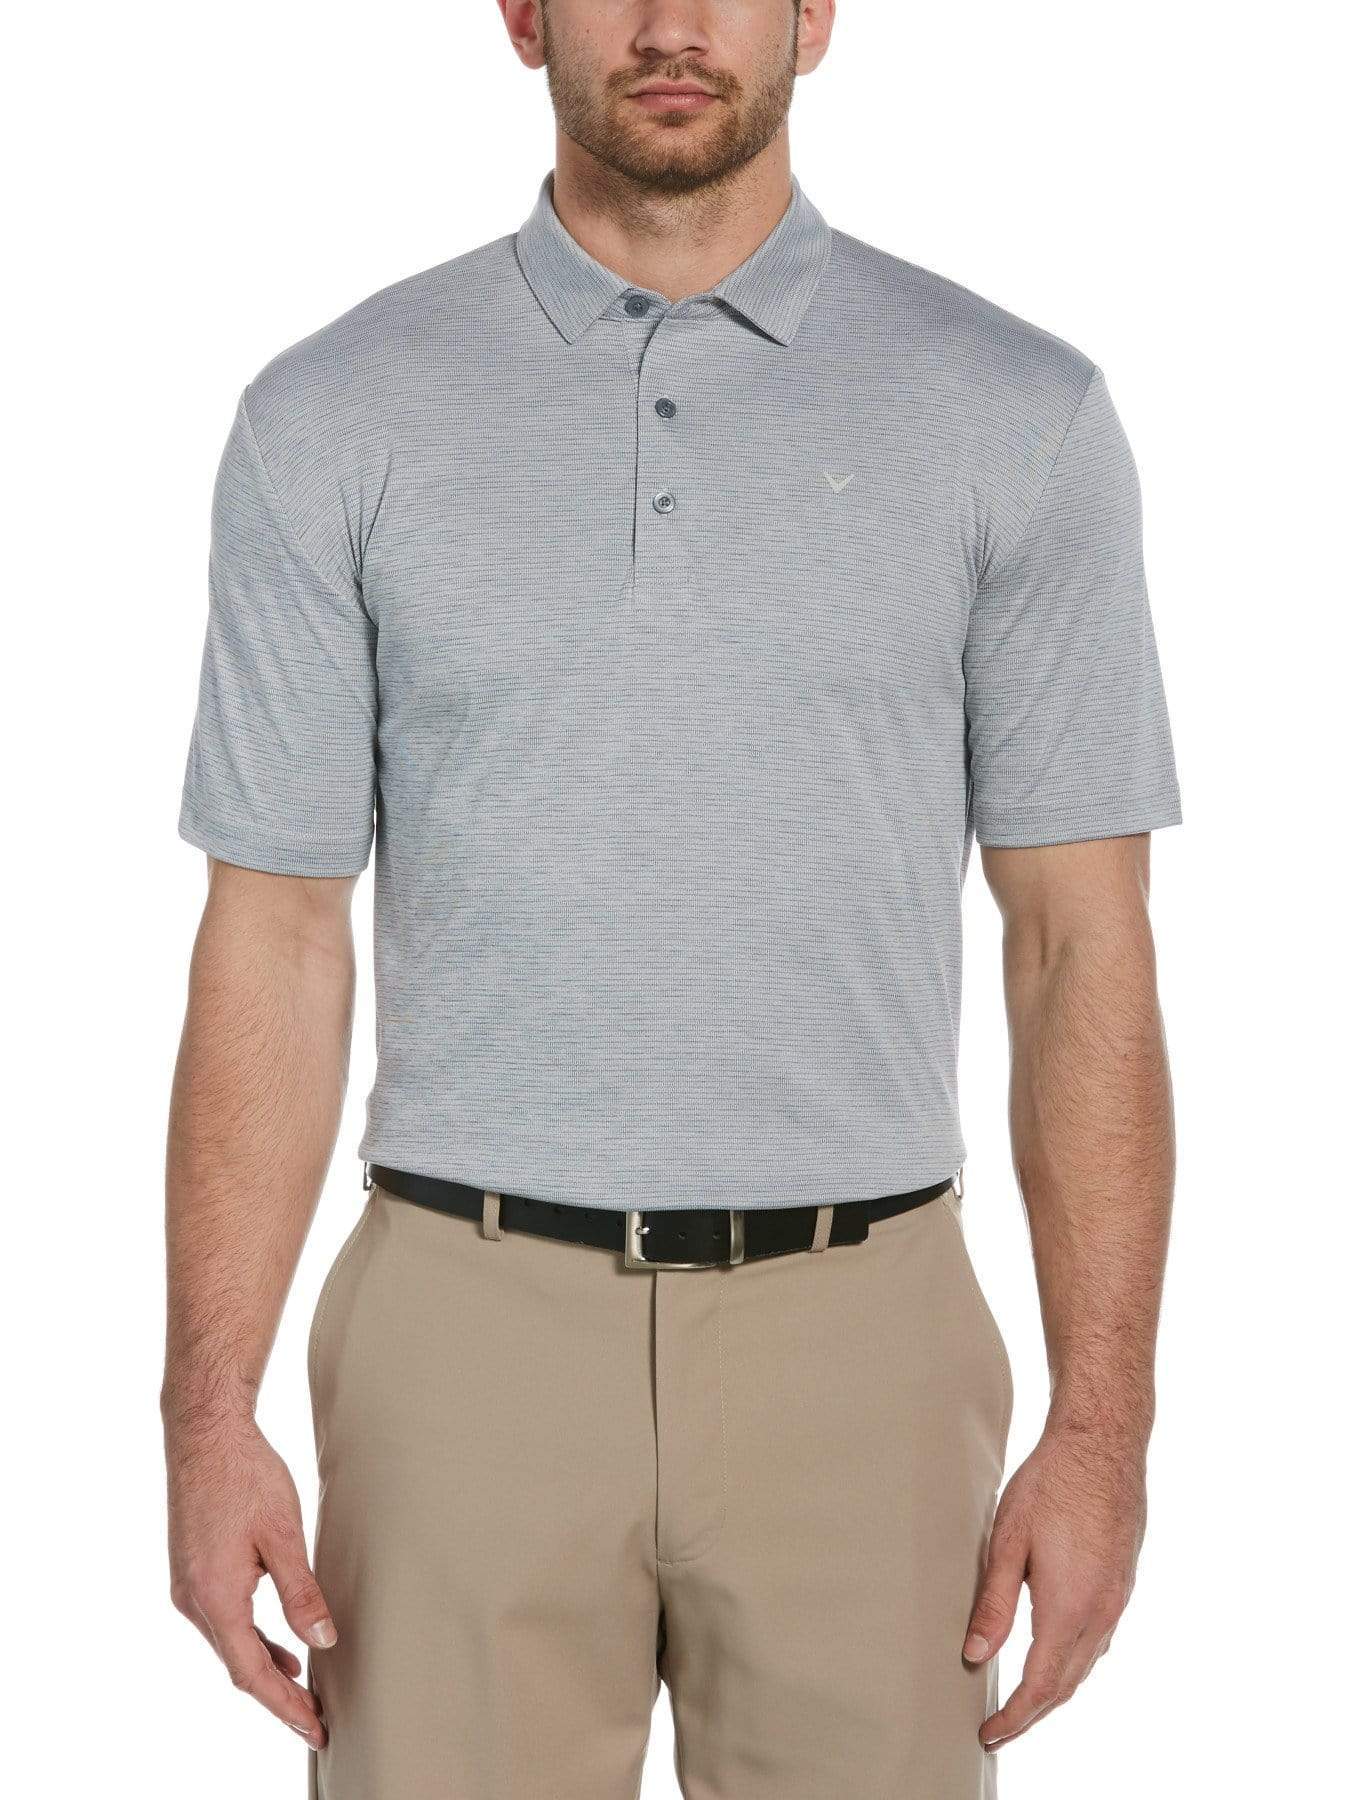 Callaway Apparel Mens Big & Tall Solid Textured Polo Shirt, Size 4X, Tradewinds Heather Gray, 100% Polyester | Golf Apparel Shop